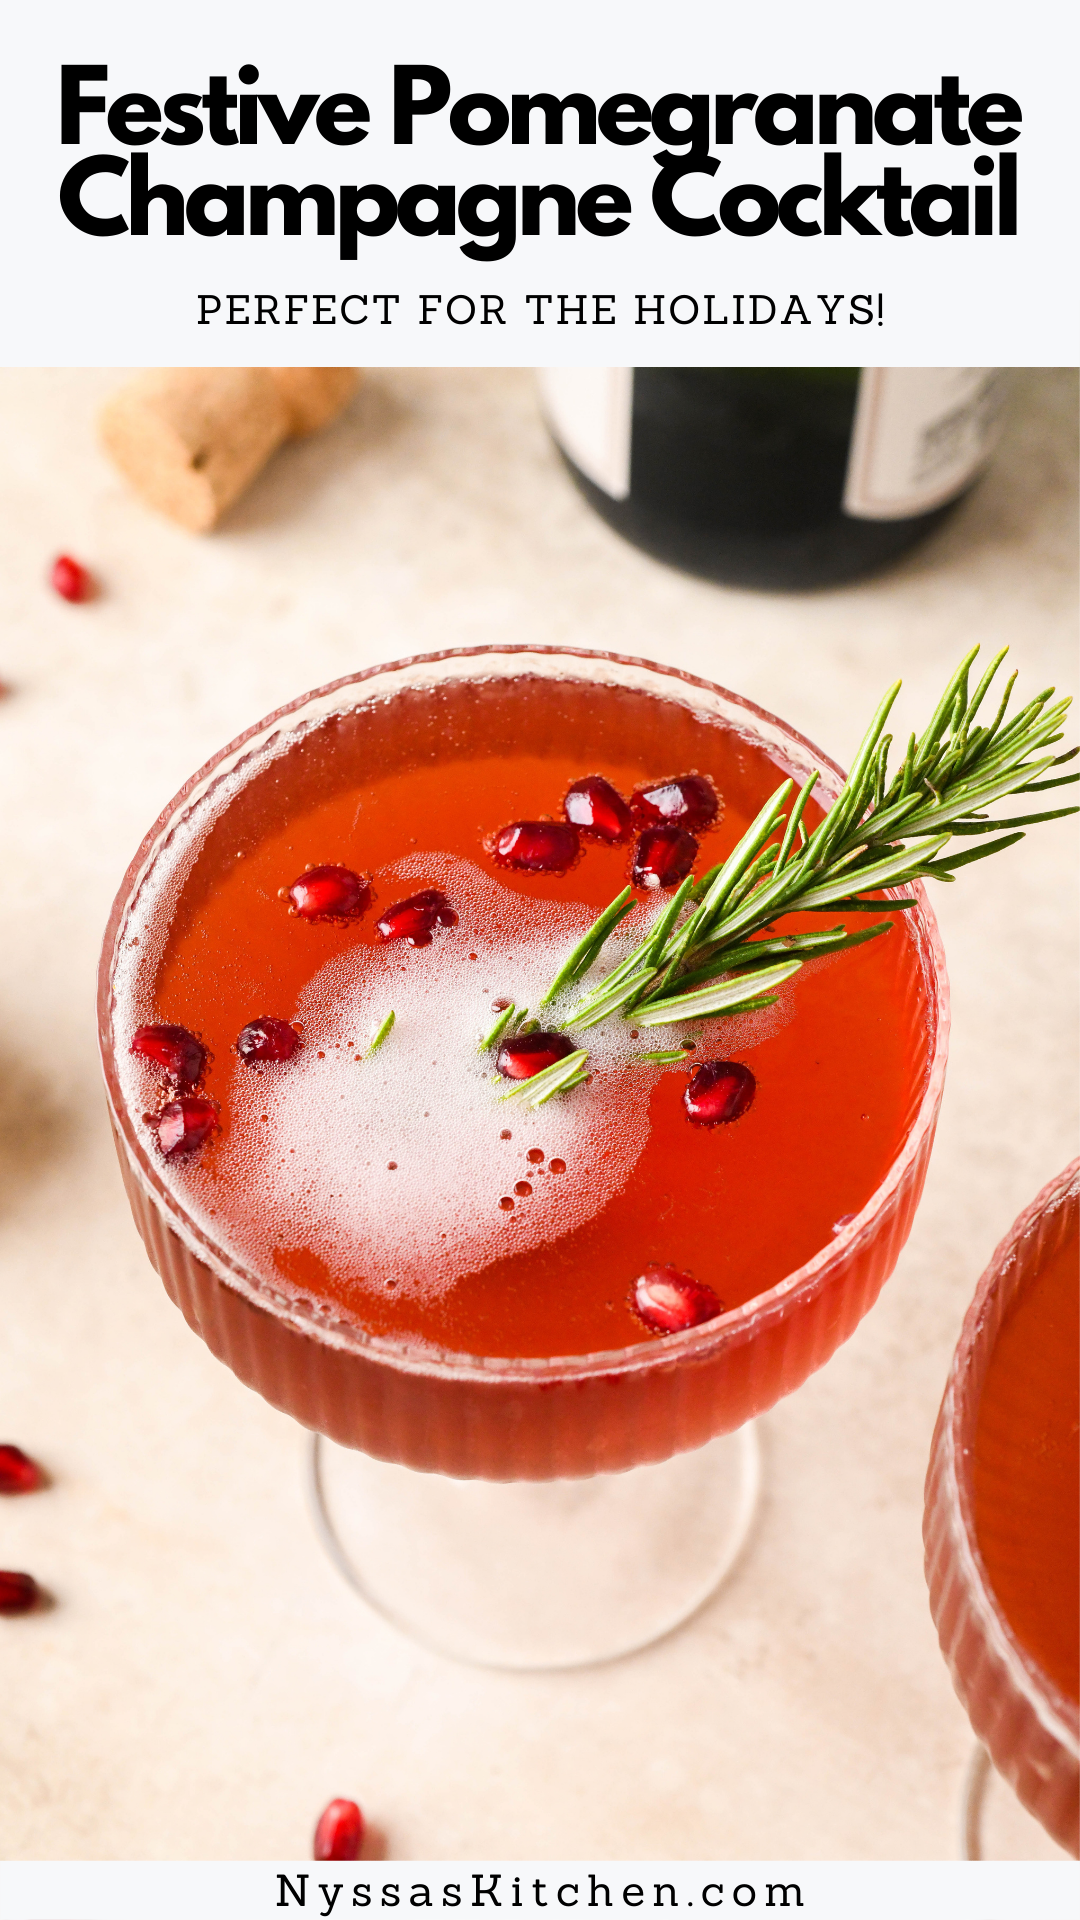 This festive pomegranate champagne cocktail is the perfect drink to serve for your holiday celebrations! Made with vodka or gin, pomegranate juice, lemon juice, maple syrup, and sparkling champagne. Bright, bubbly, and so delicious!